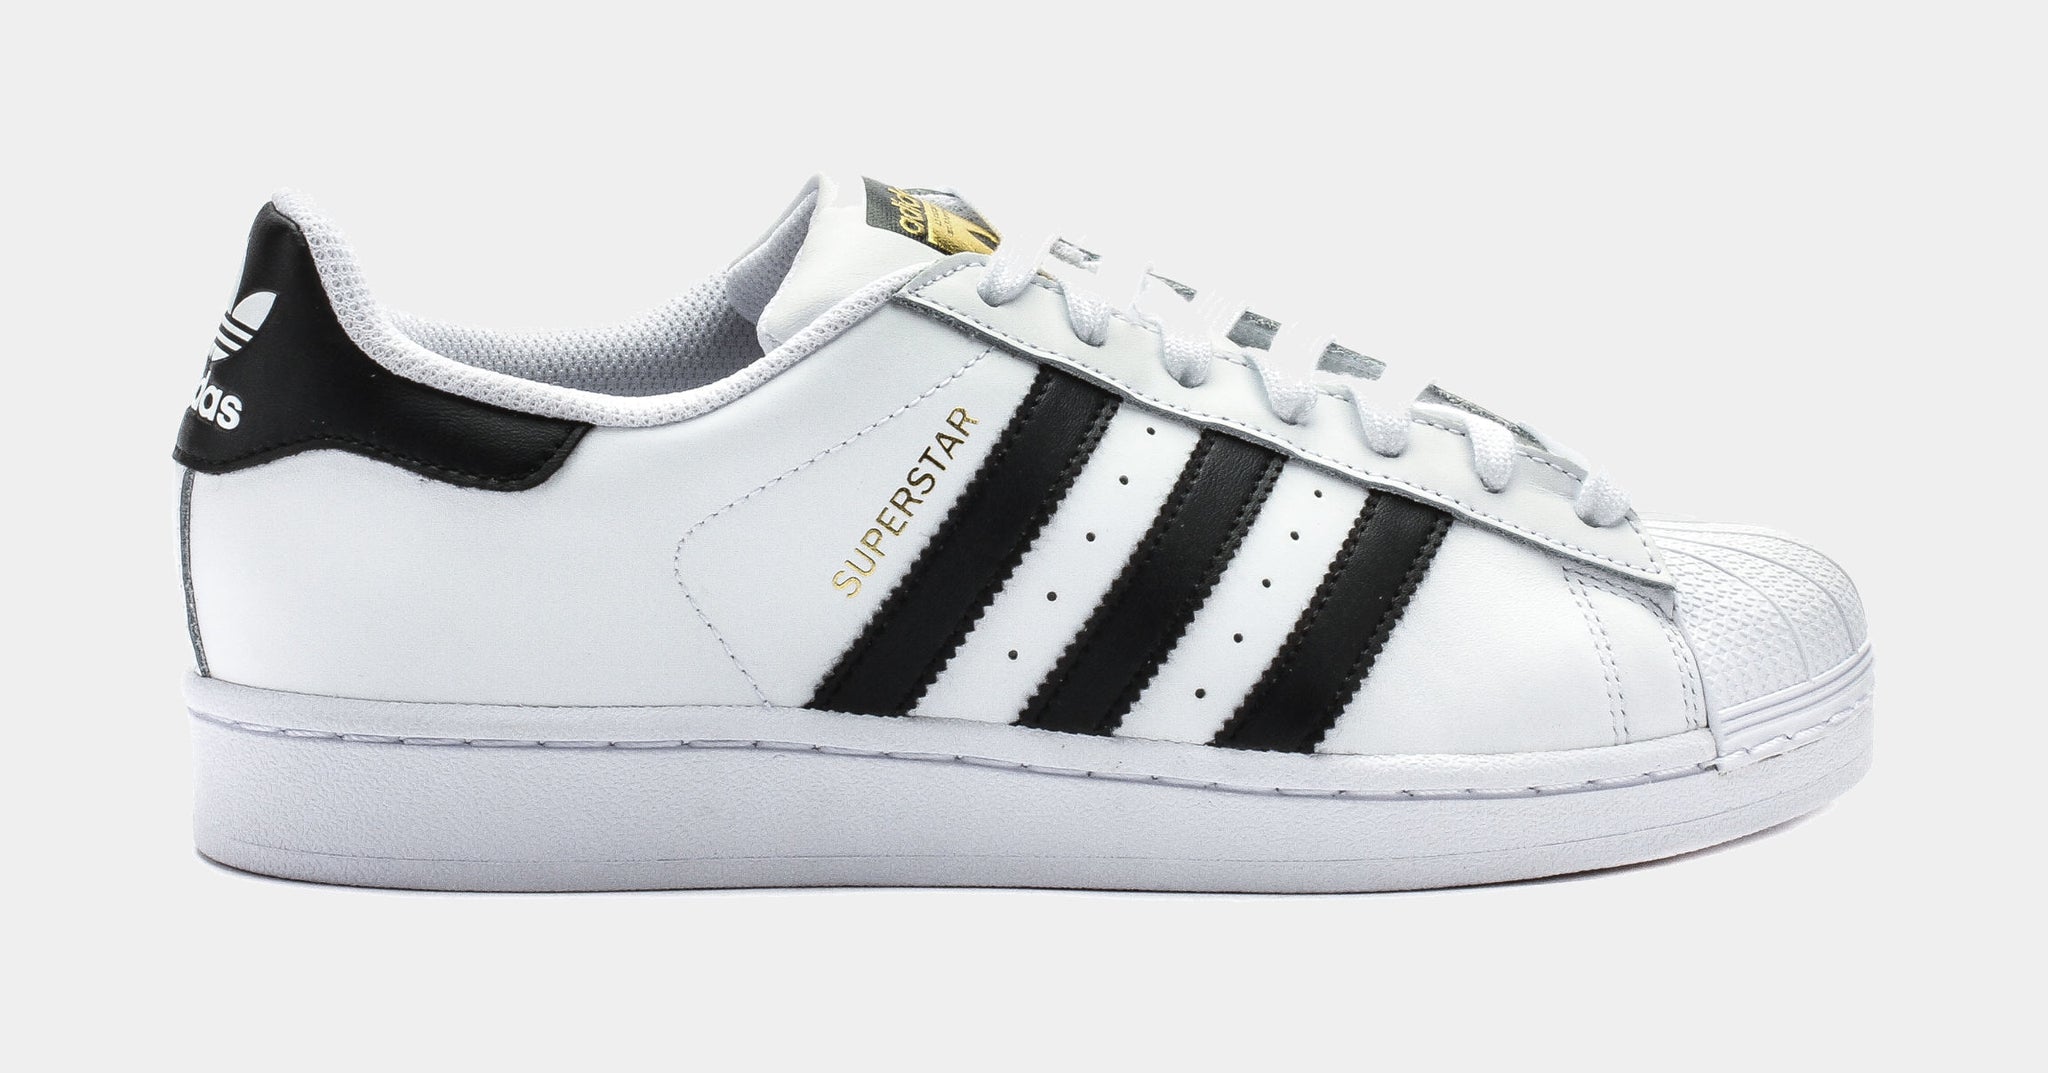 Adidas Shell Toe Shoes for Men